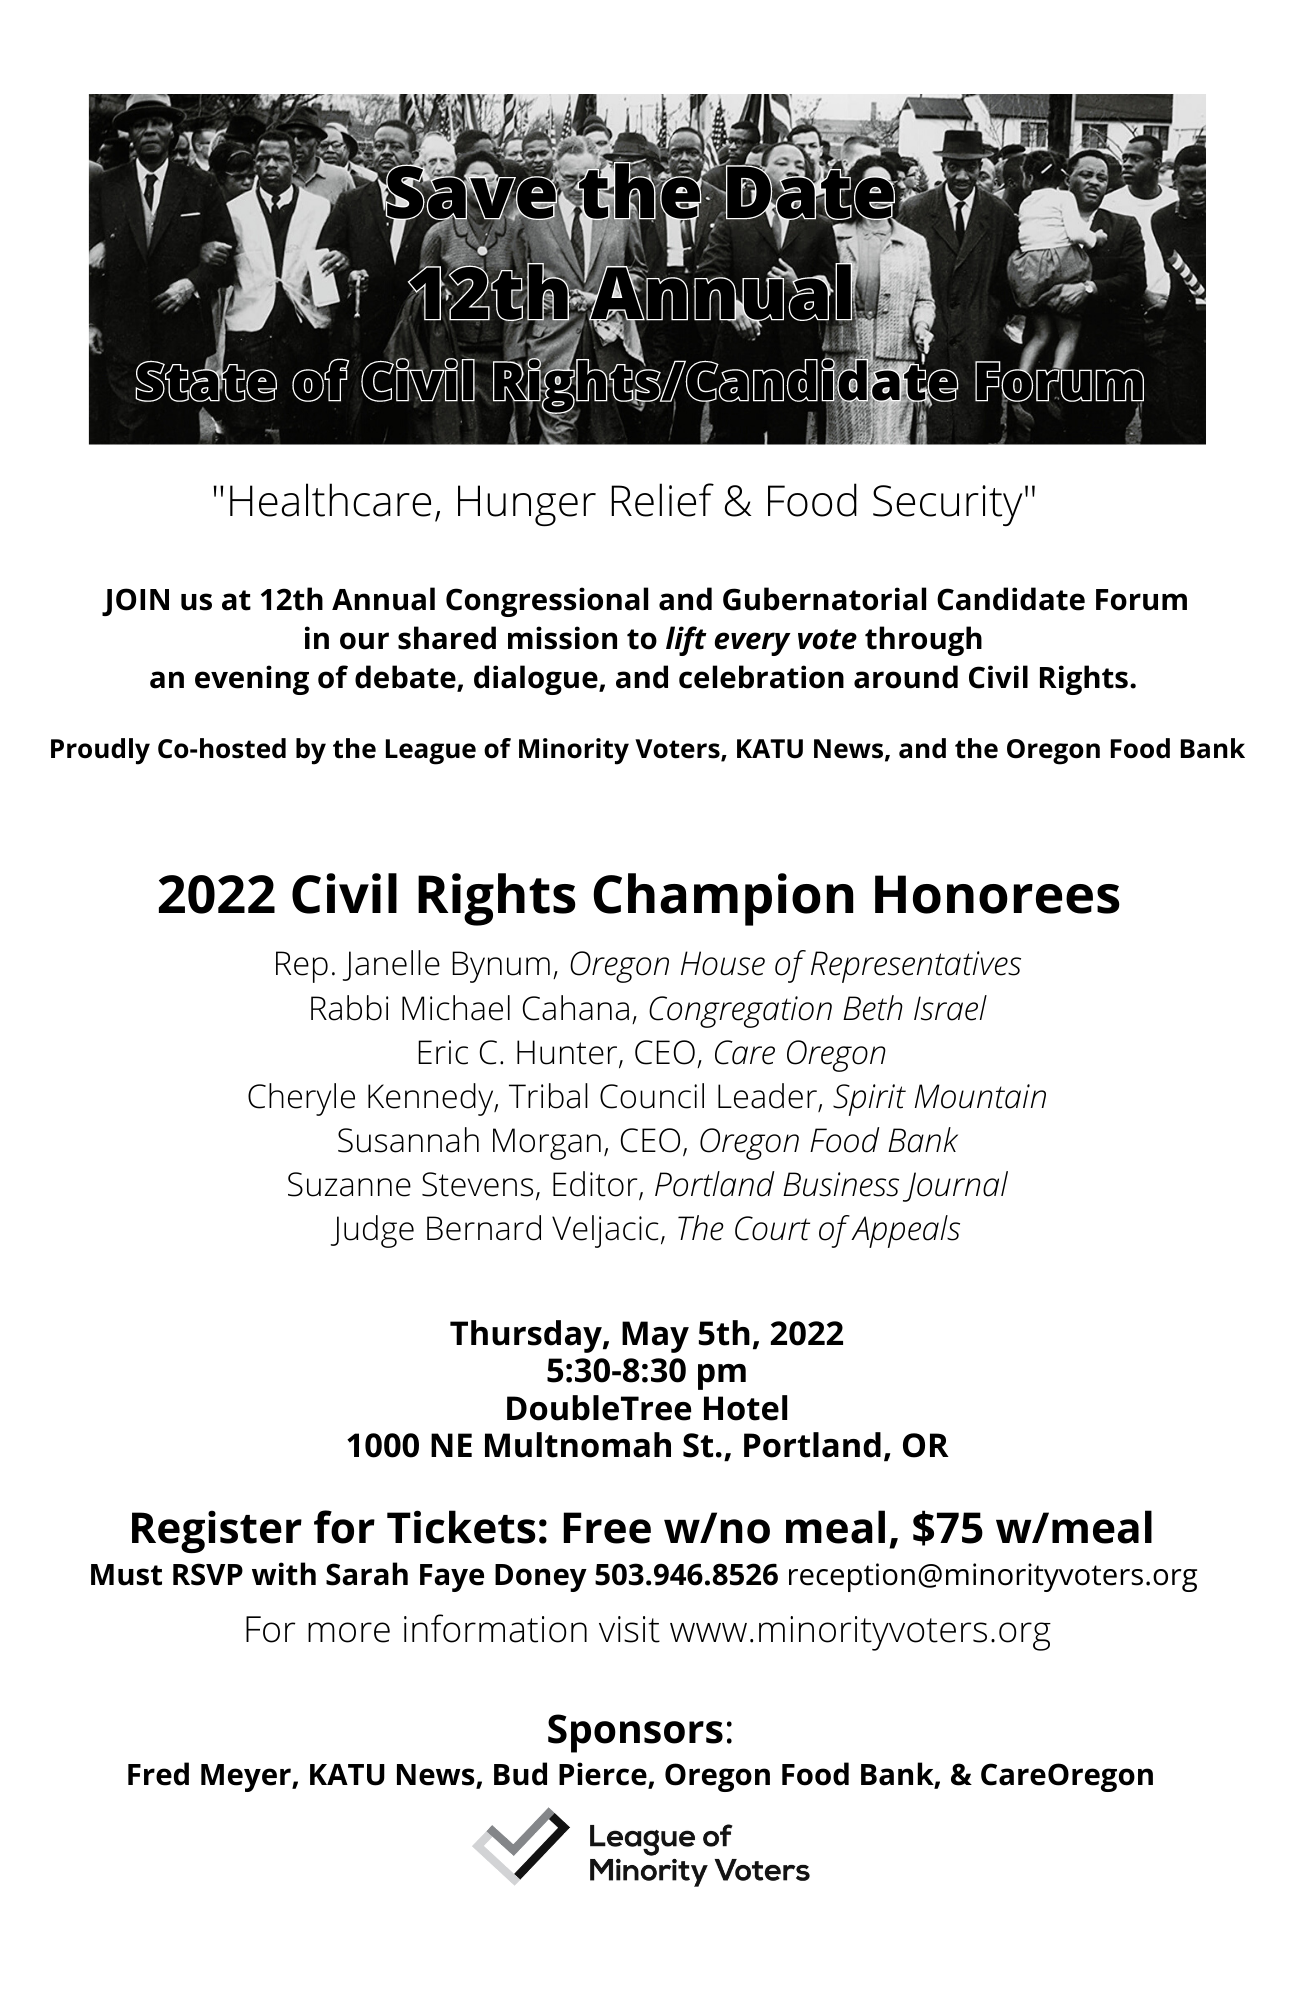 12th Annual State of Civil Rights Candidate Forum